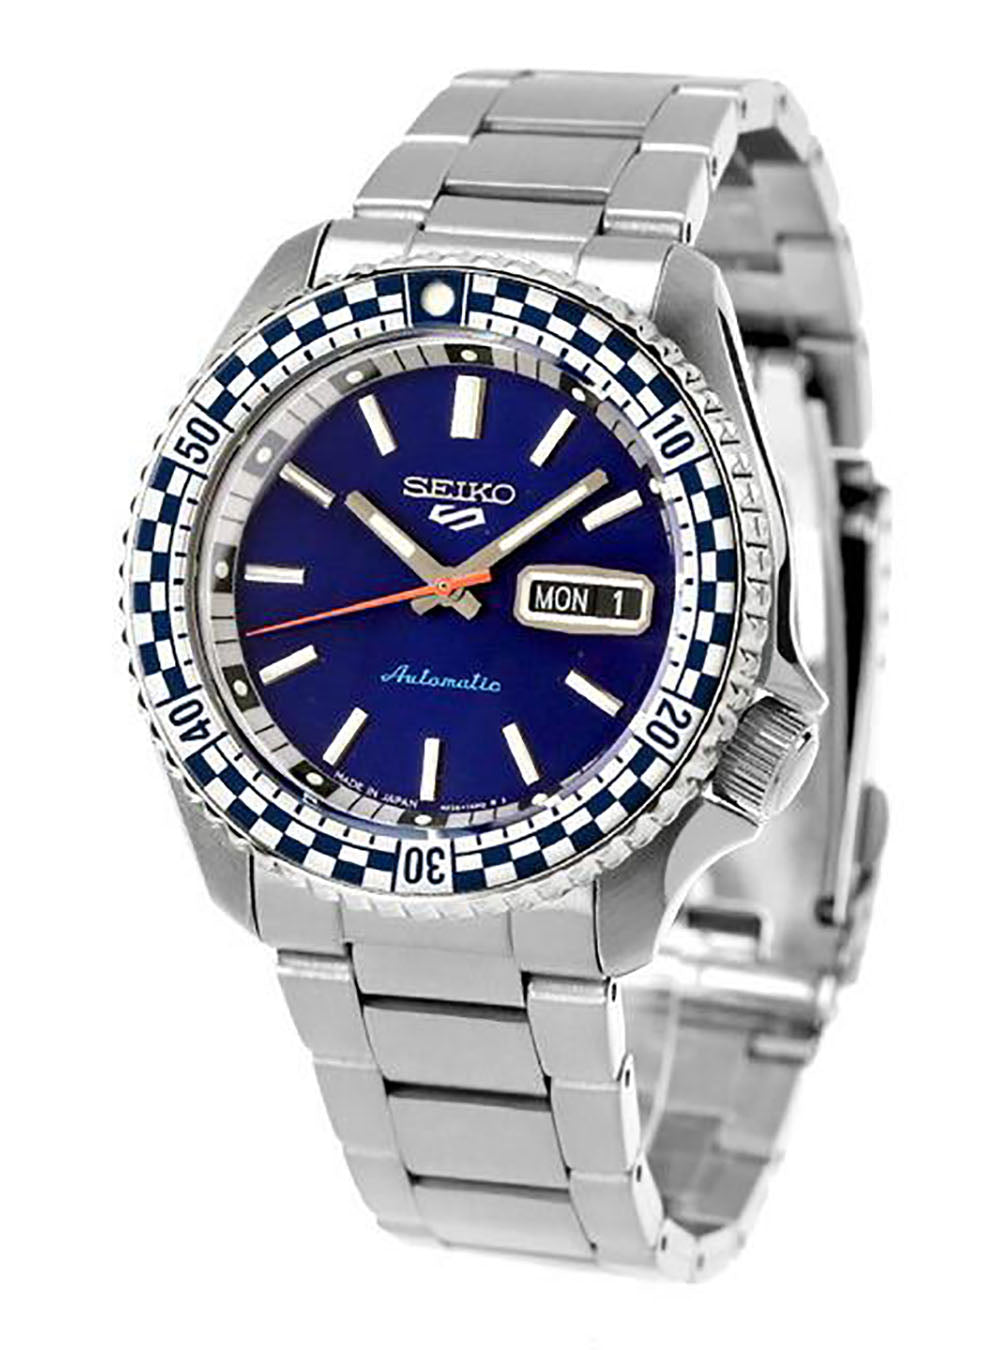 SEIKO 5 SPORTS WATCH SKX SPORTS STYLE 2024 SPECIAL EDITION MADE IN JAPAN JDM